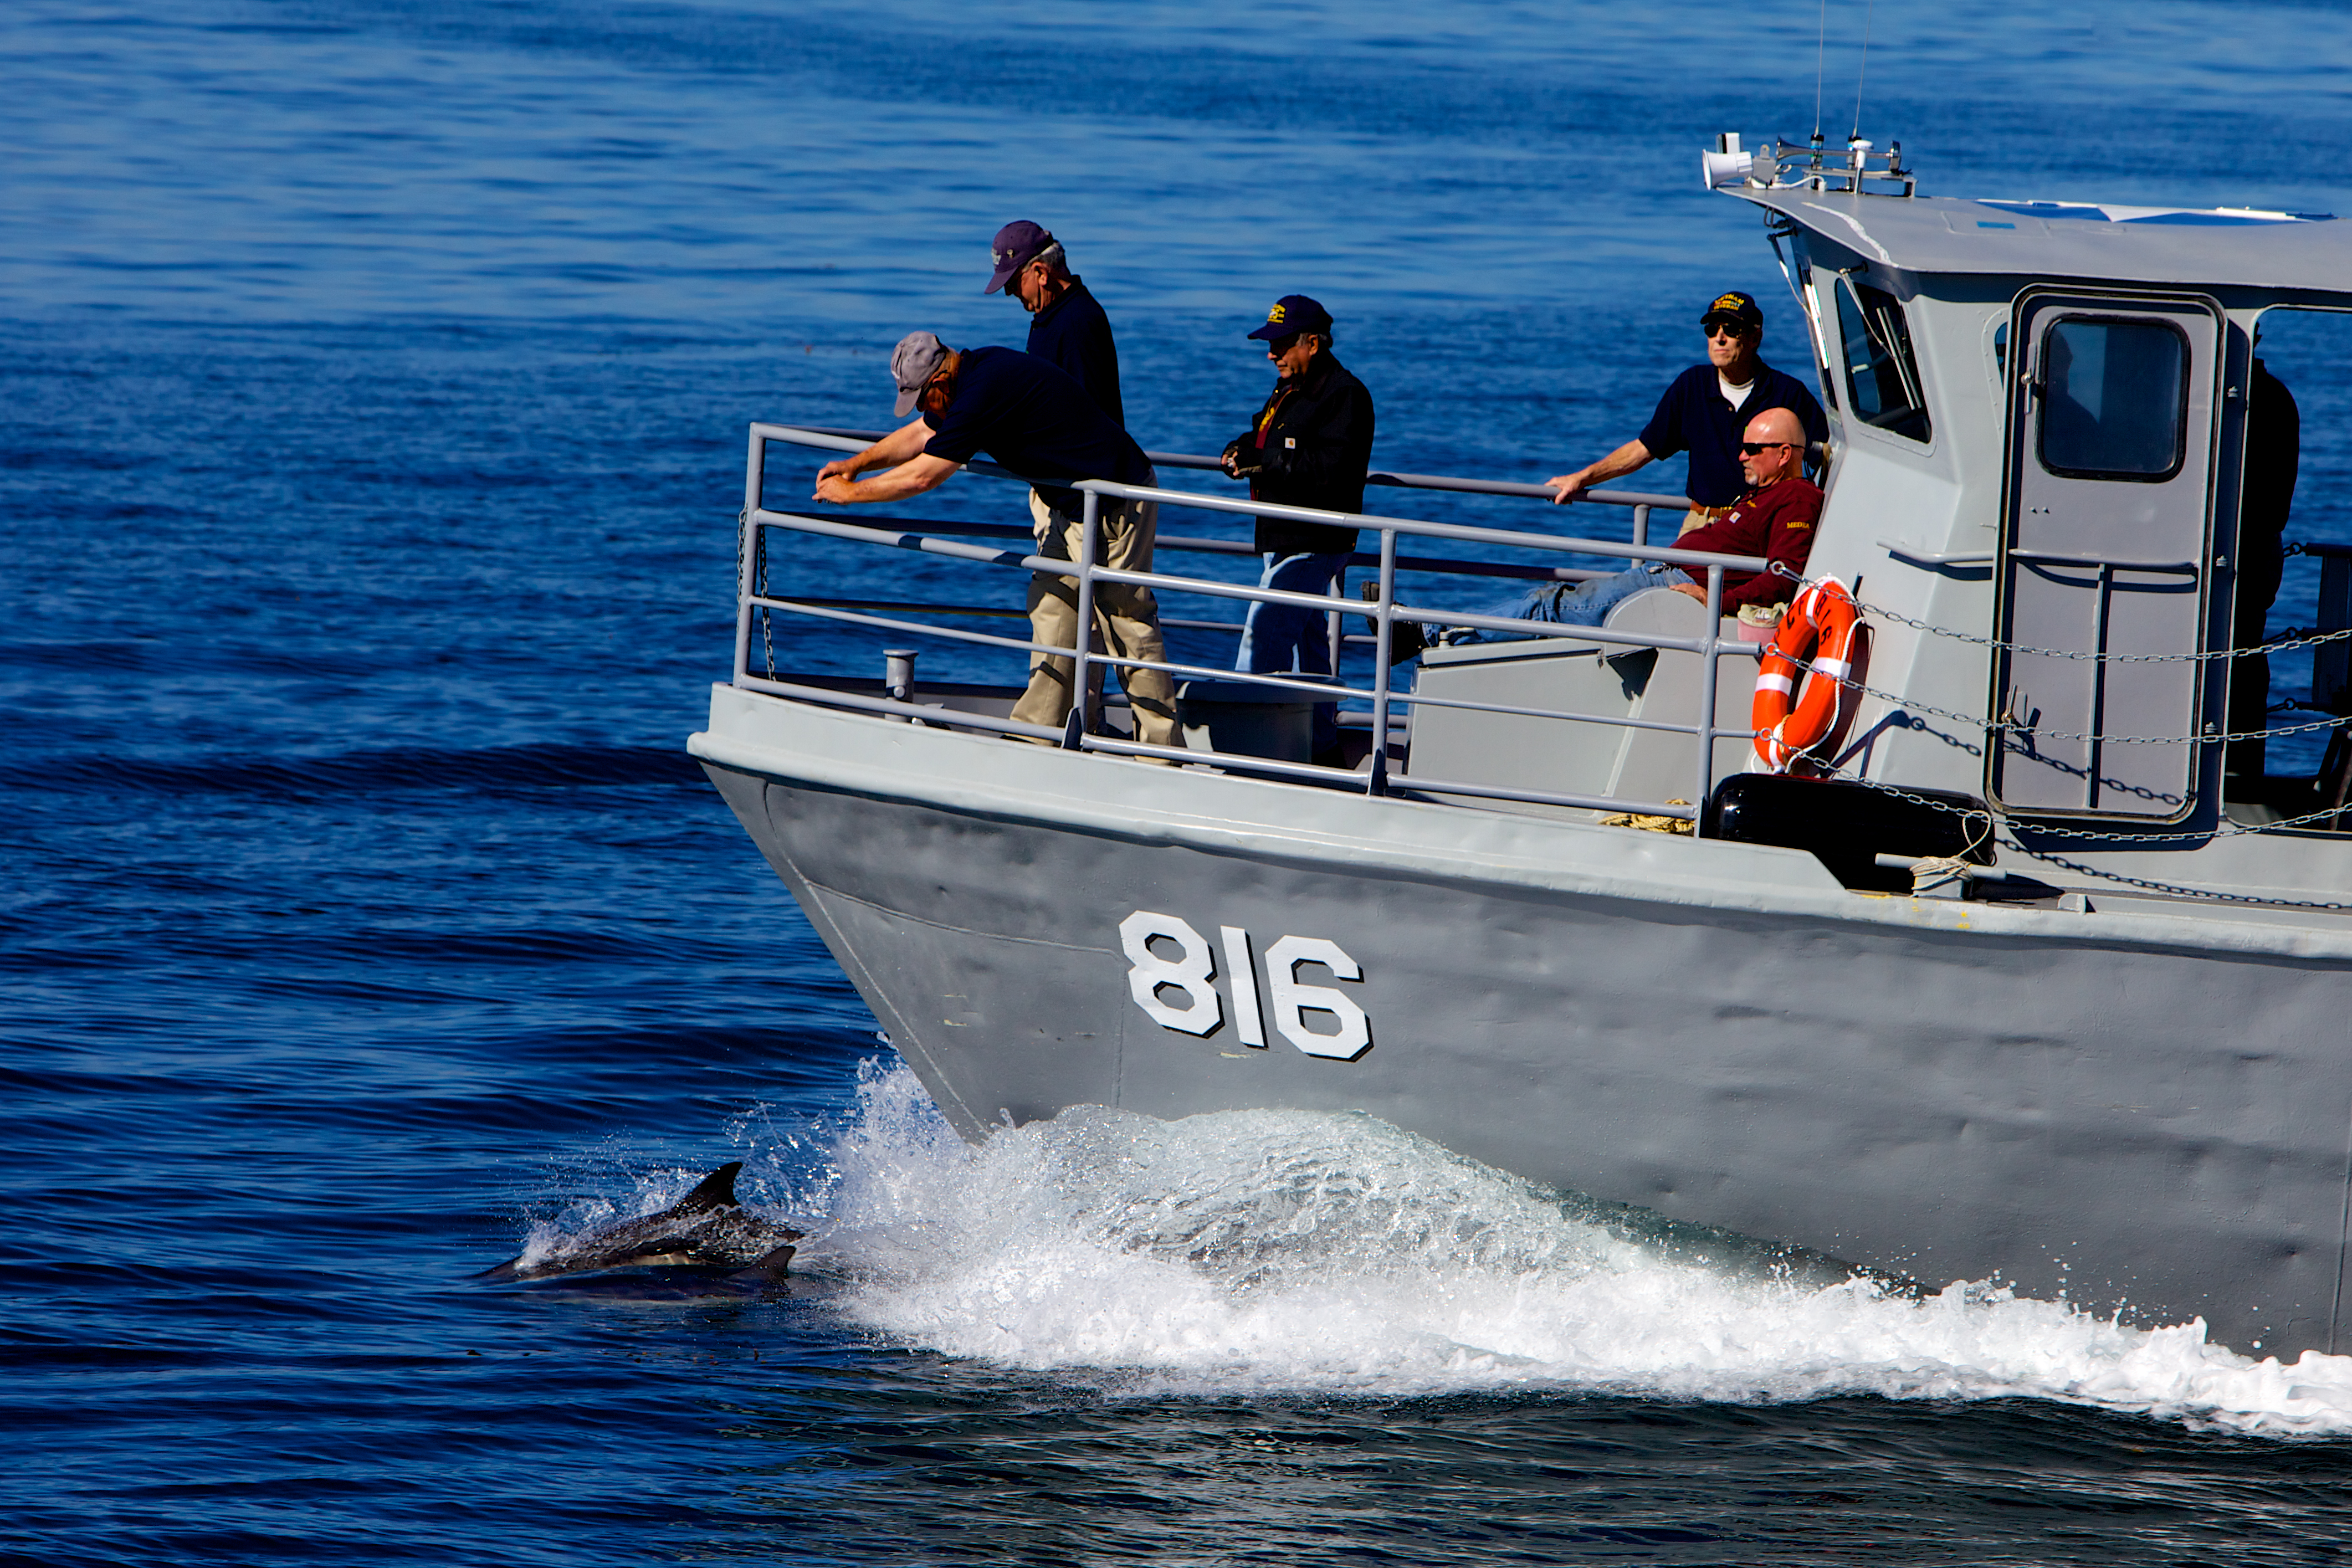 Take a ride on an authentic U.S. Navy Swift Boat!